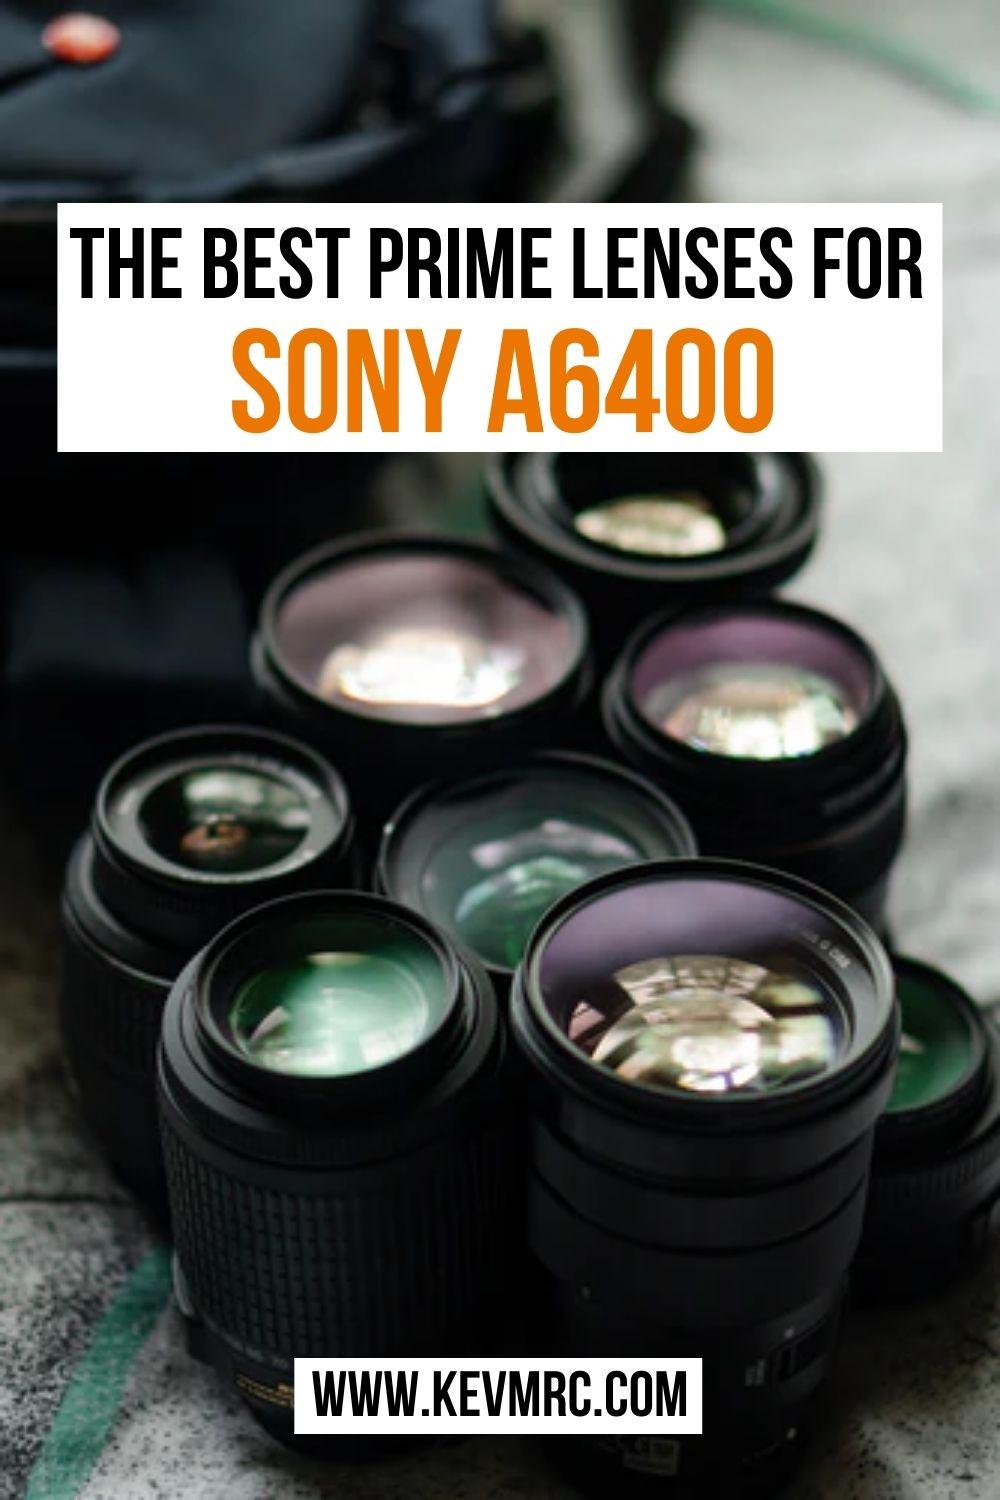 Find the best prime lenses for Sony A6400. camera lens guide | photo guide | best sony lenses | photography gear 